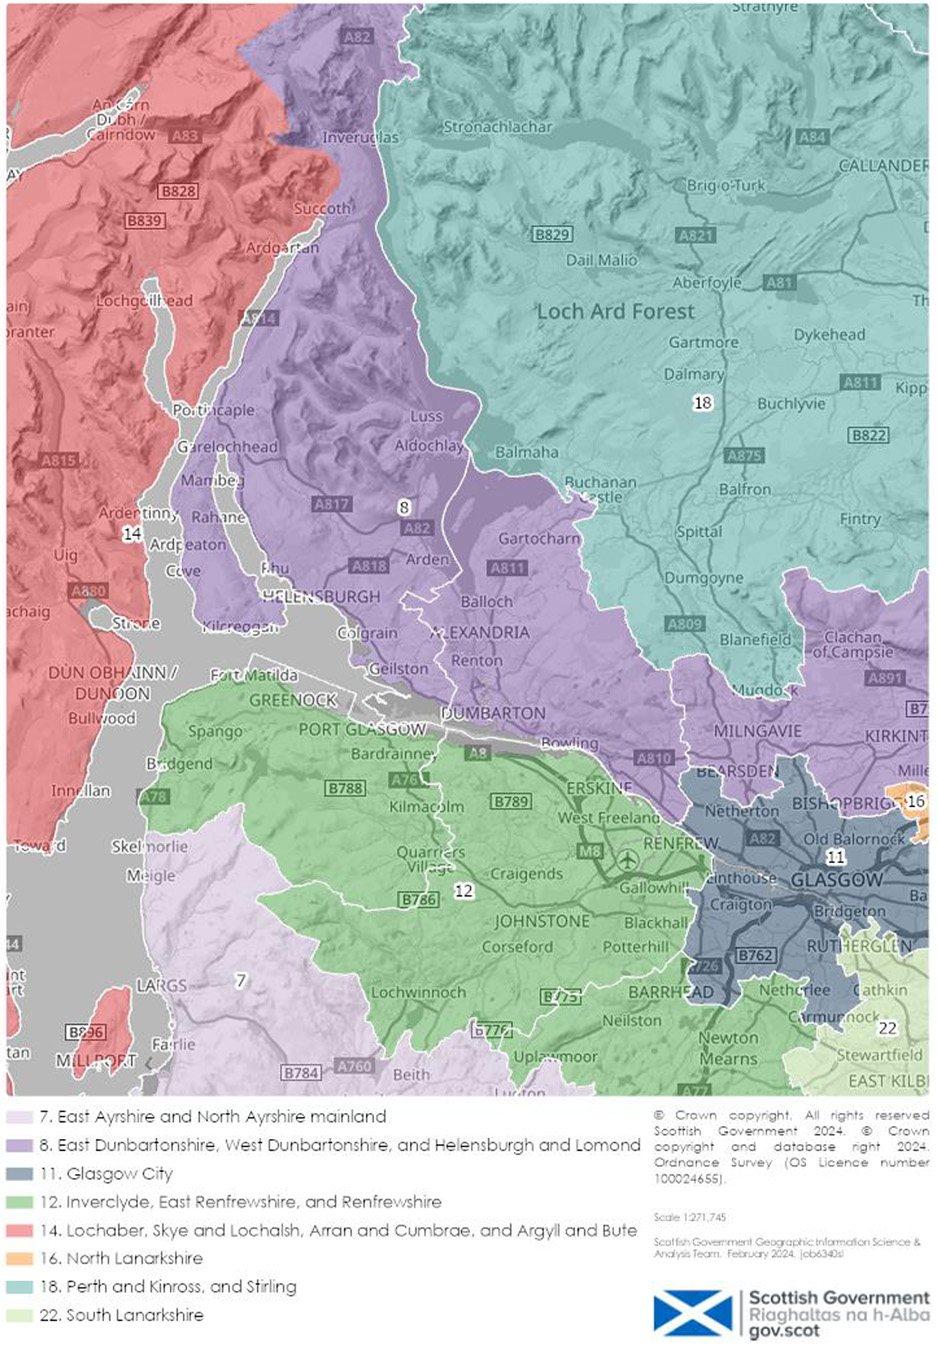 A map focusing on Helensburgh and Lomond showing that that this area is currently included in the existing ‘‘East Dunbartonshire, West Dunbartonshire, and Helensburgh and Lomond’ ITL3 region.